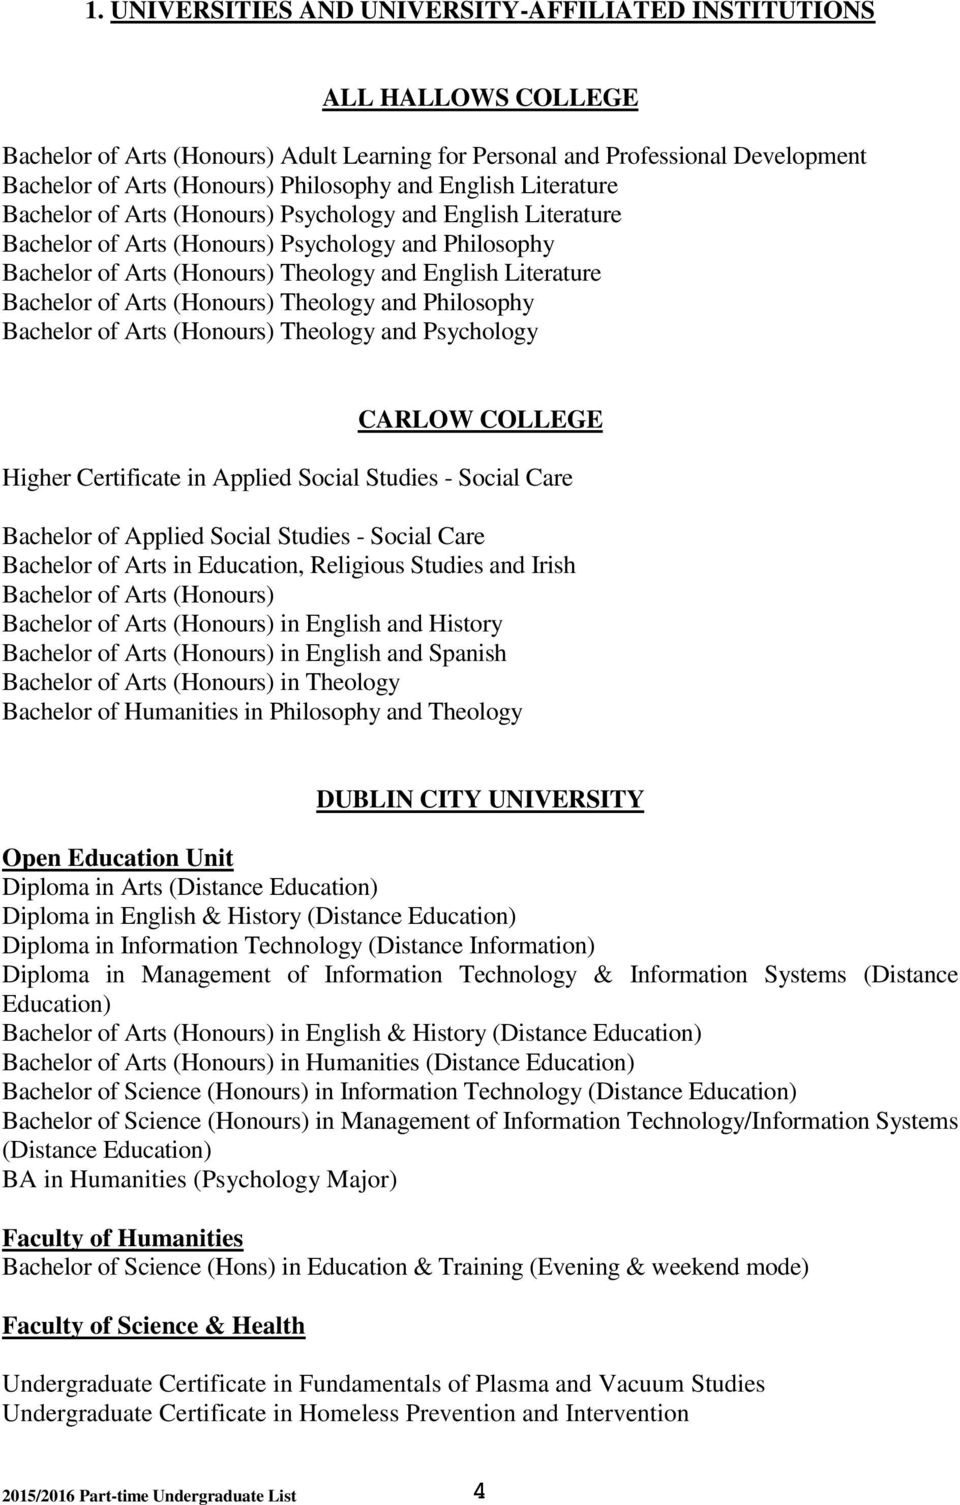 Bachelor of Arts (Honours) Theology and Philosophy Bachelor of Arts (Honours) Theology and Psychology CARLOW COLLEGE Higher Certificate in Applied Social Studies - Social Care Bachelor of Applied